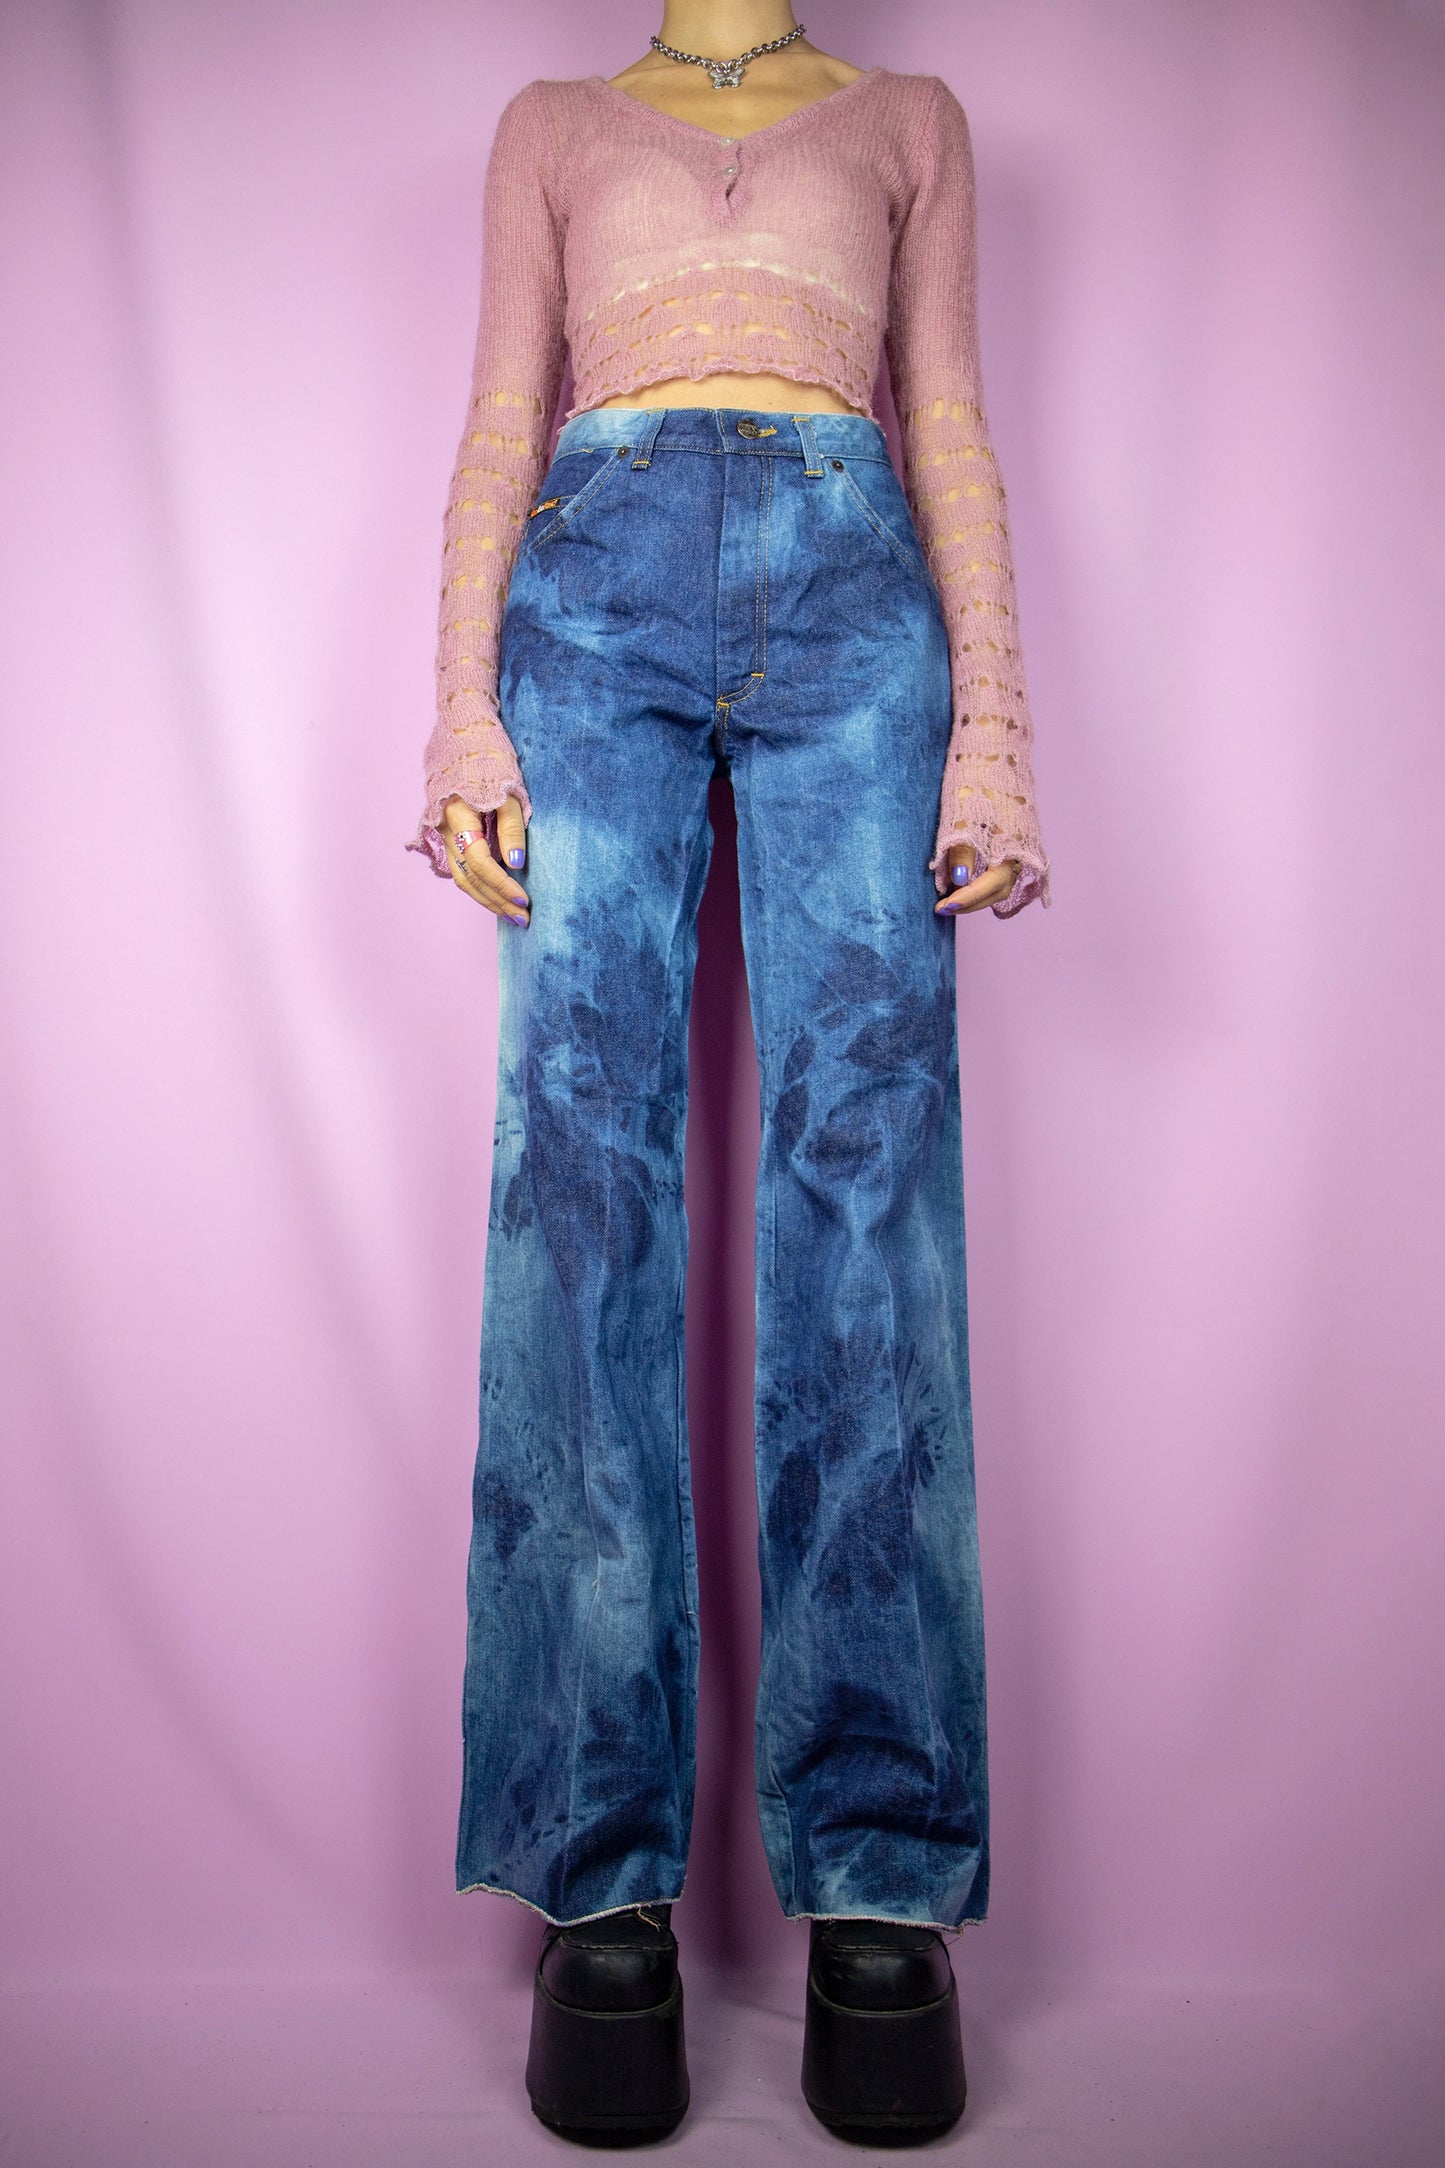 The Vintage 90’s Bleached Wide Jeans are high-waisted, tie-dye bleached wide-leg pants with pockets and a raw hem. Ideal for festivals, raves, and clubbing, these denim trousers capture the cyber millennium style of the 1990s.